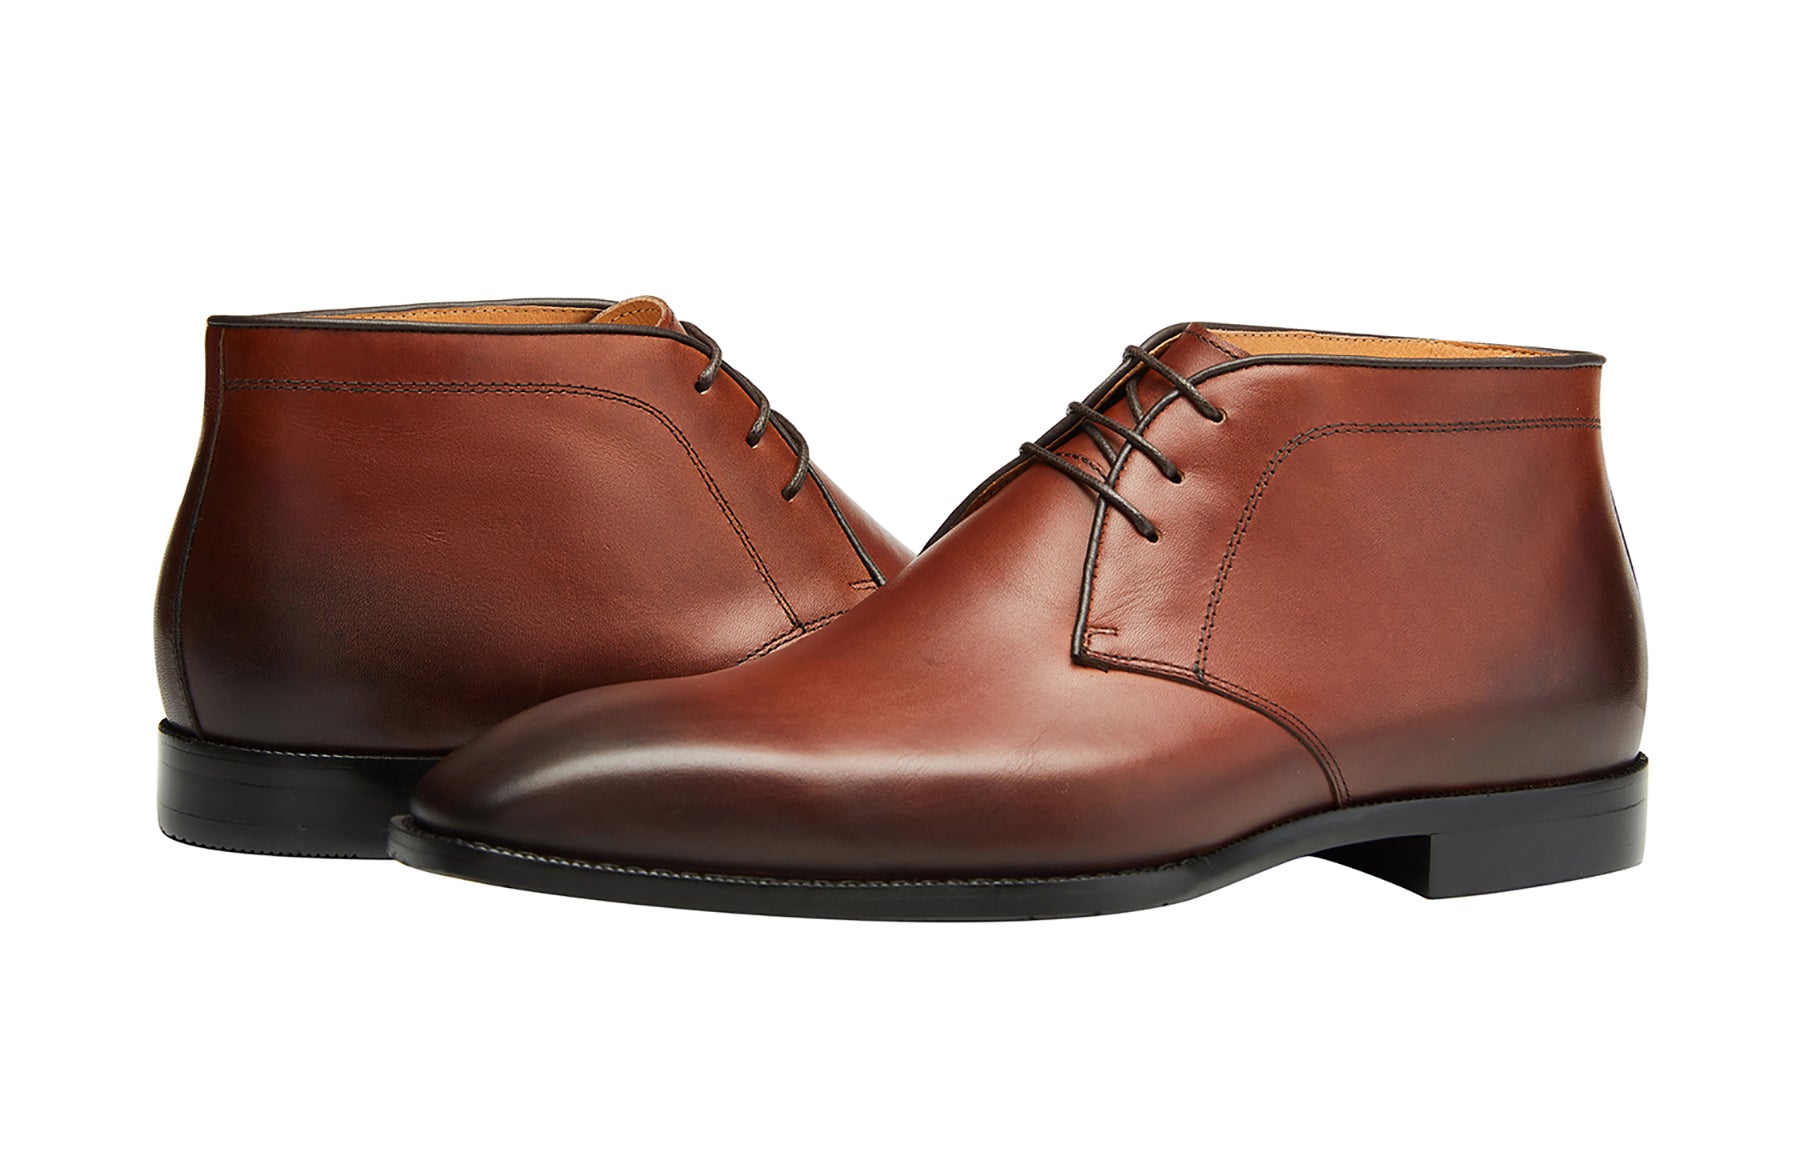 Men's Formal Leather Chukka Boots